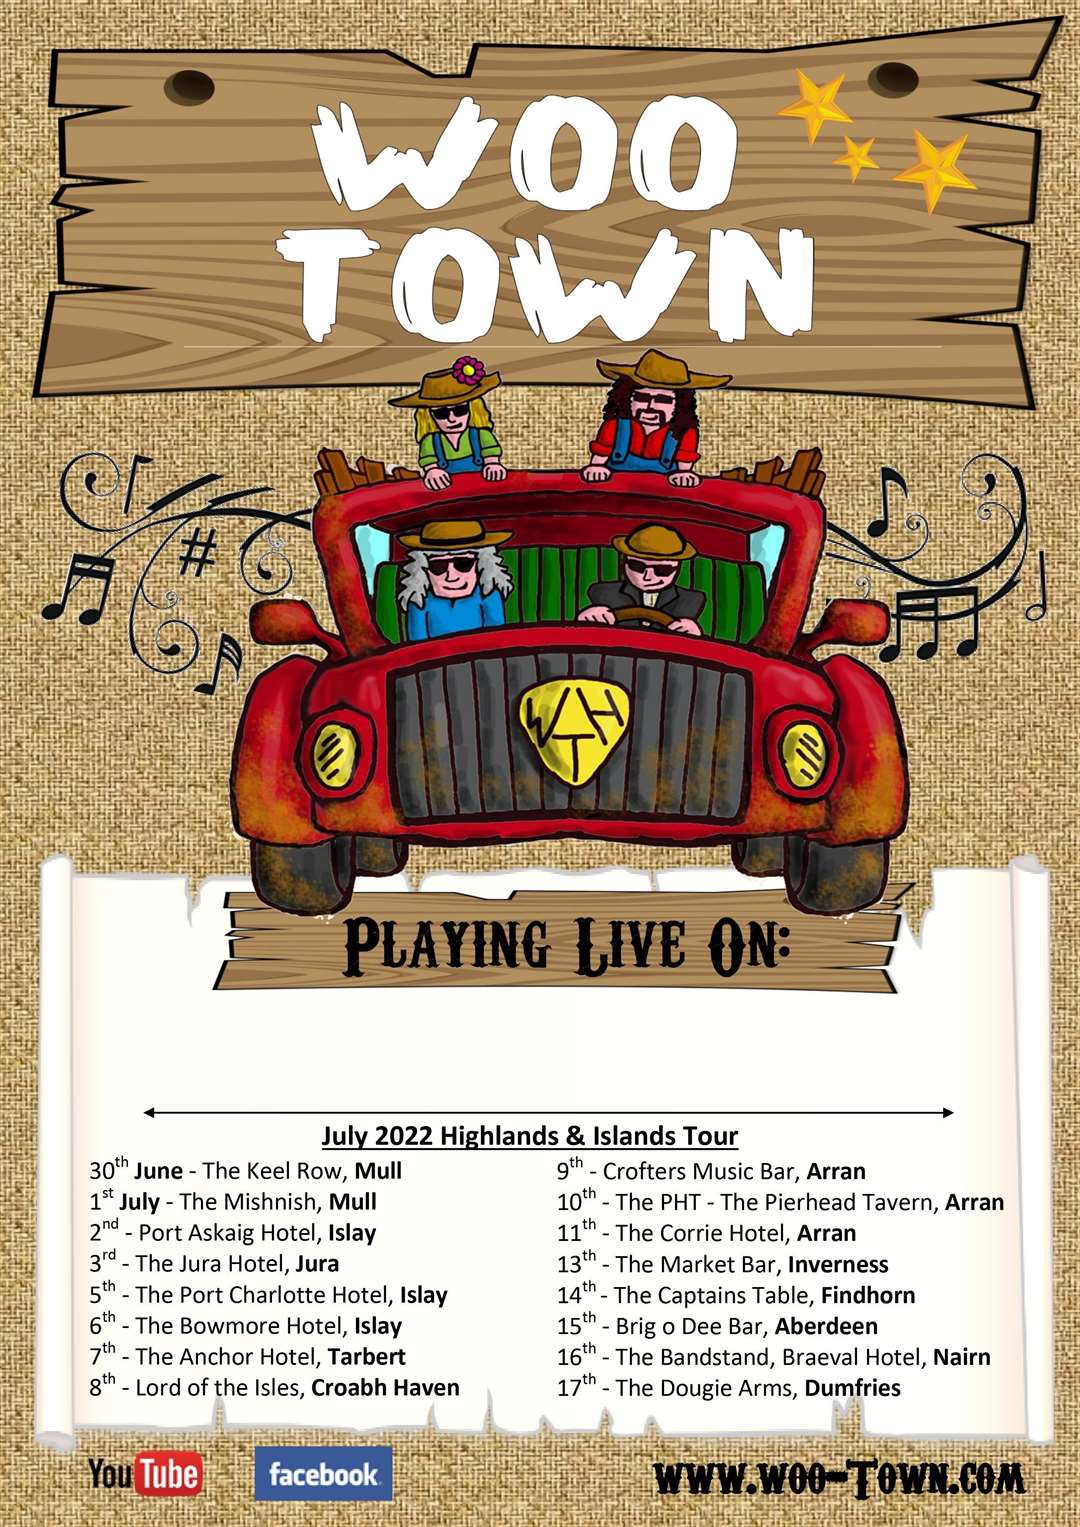 The Woo Town Hillbillies will play at The Captain's Table in Findhorn as part of their latest tour.